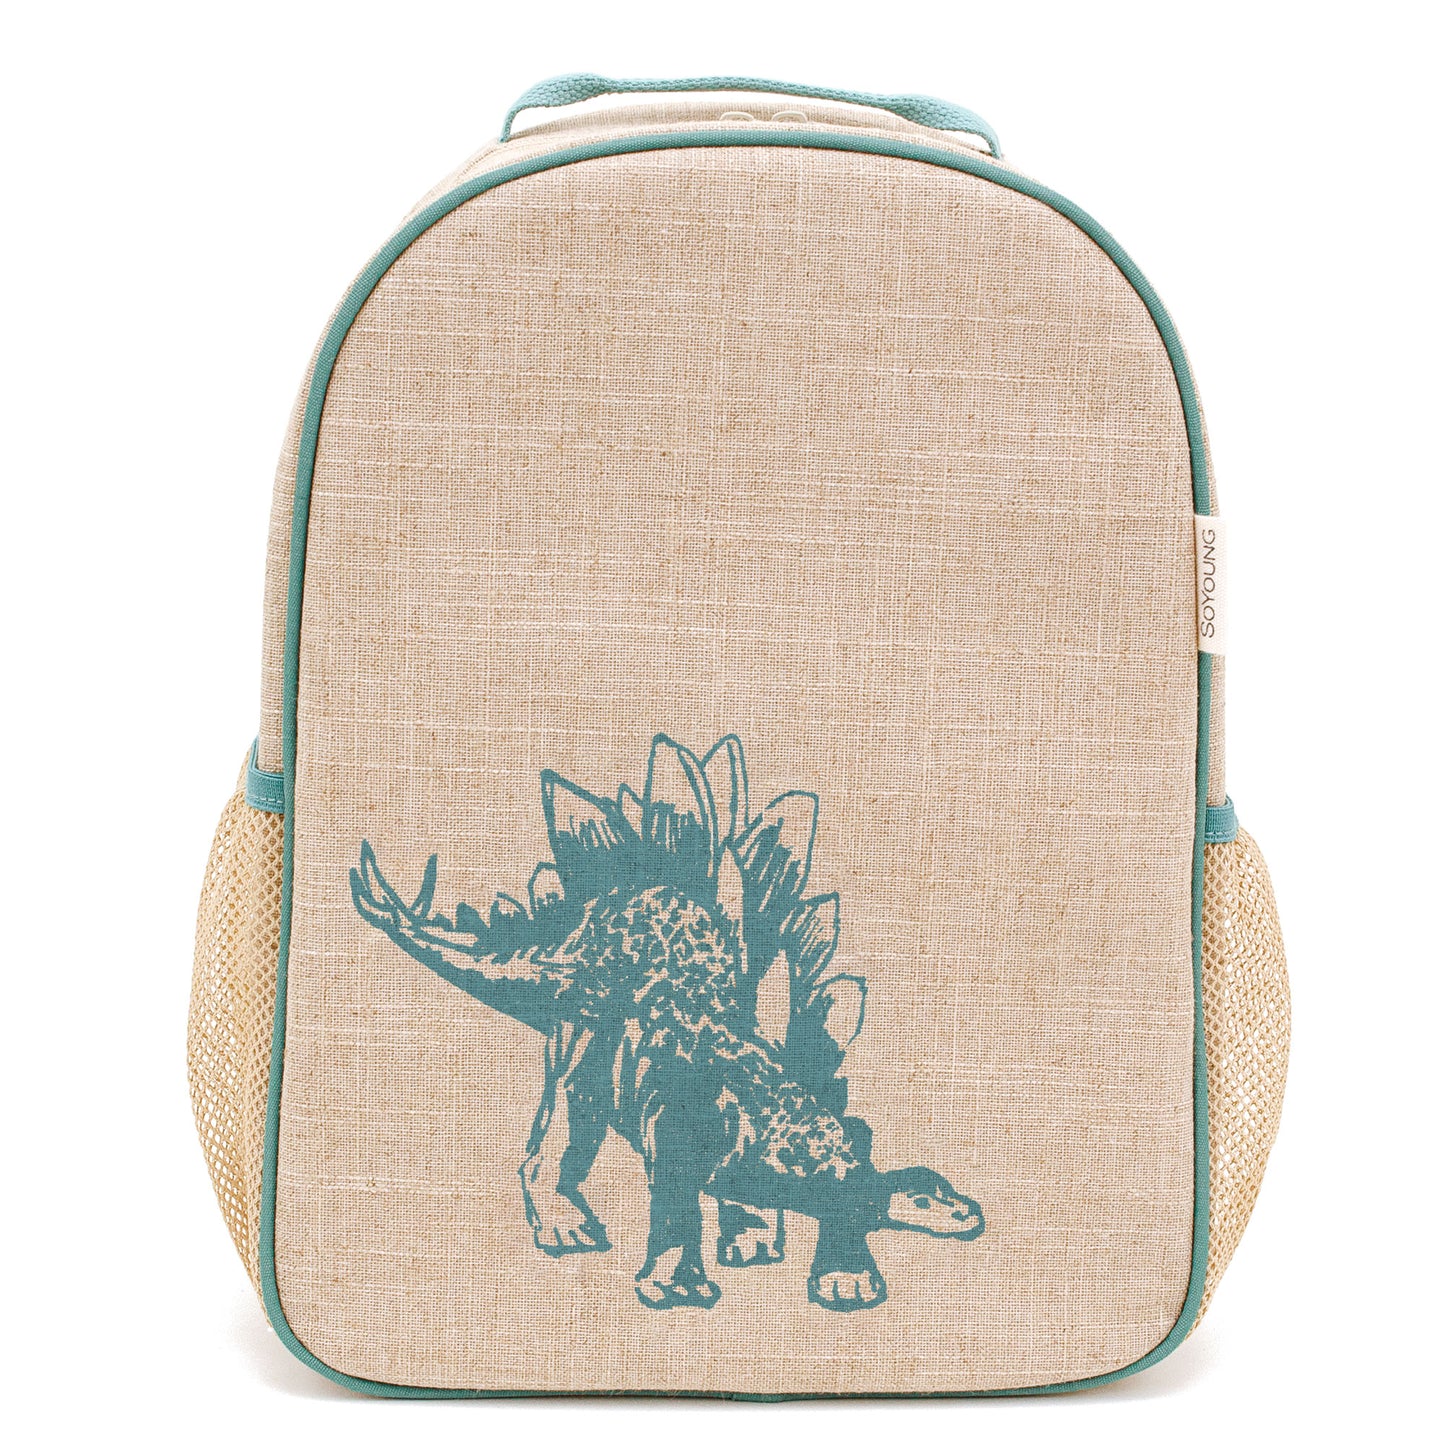 SoYoung Kids Backpack